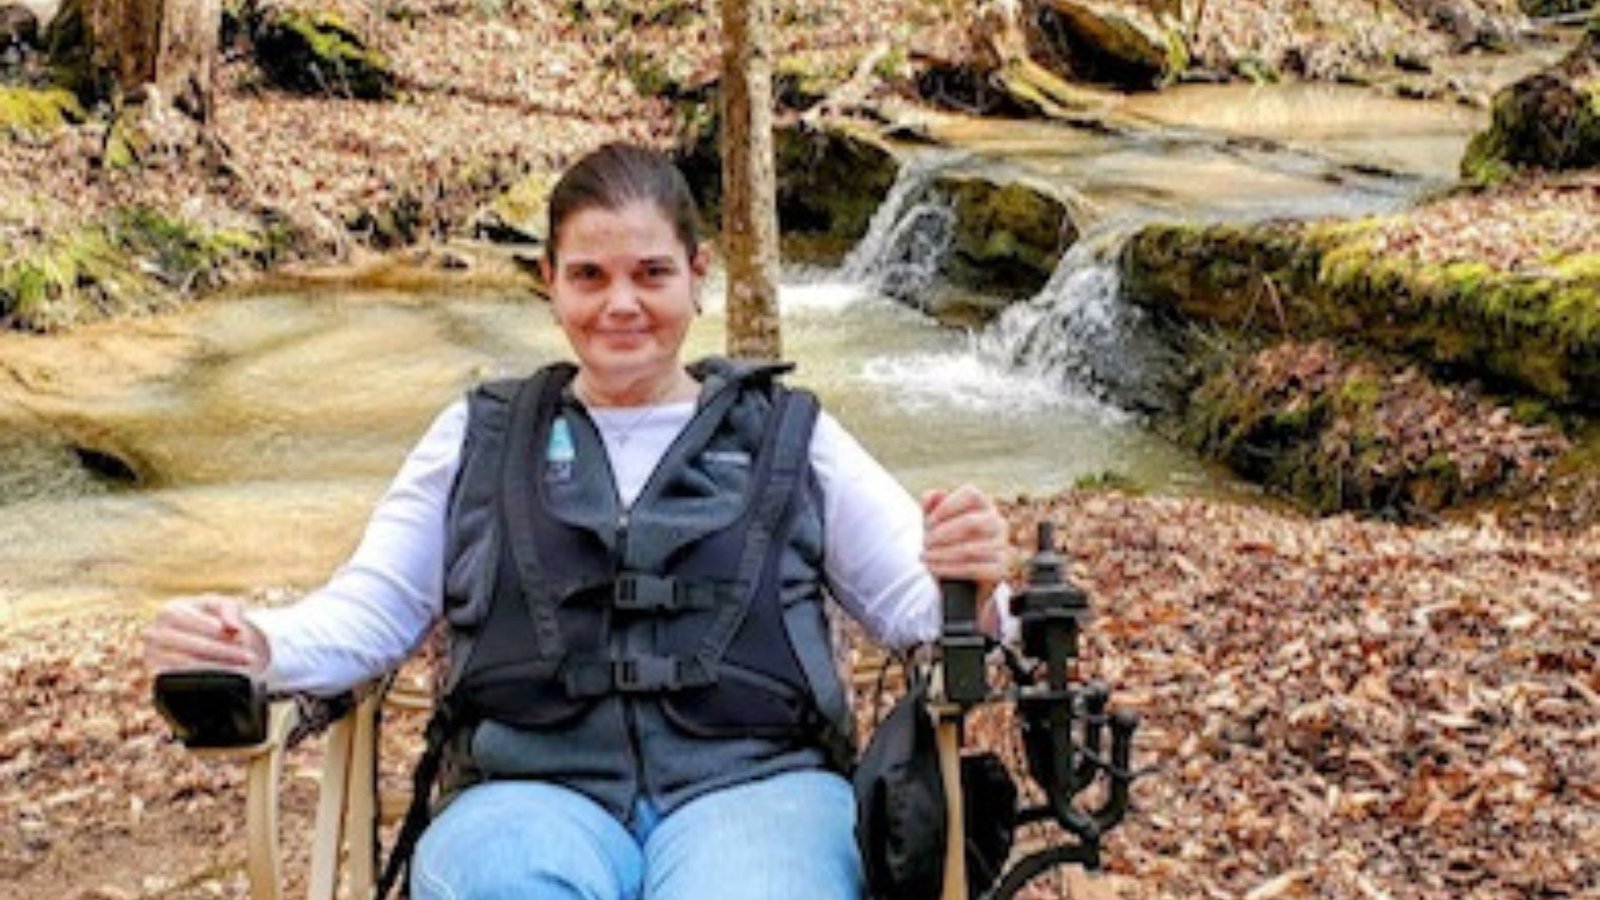 Melanie Dunn in her trackchair, wearing a green jacket and blue jeans, on a wooded trail.